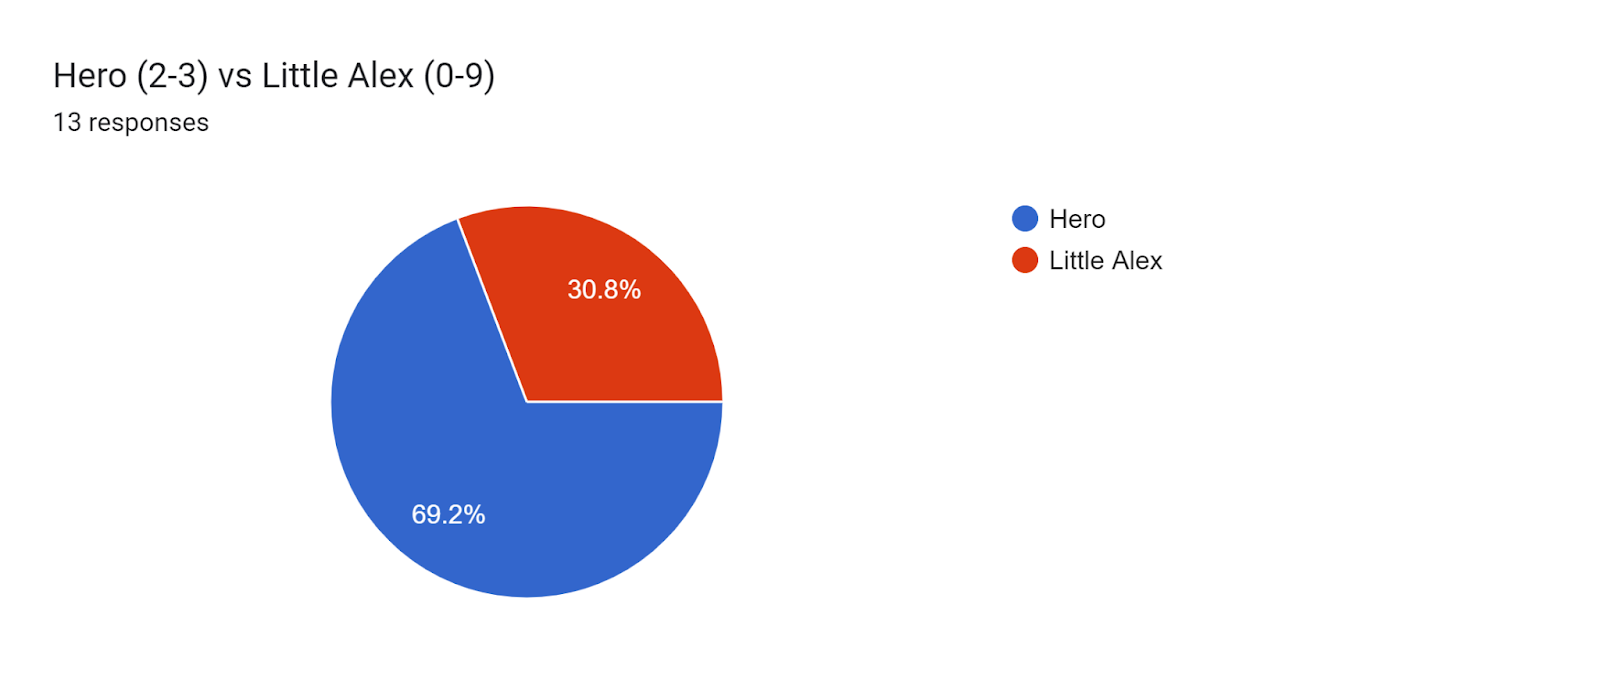 Forms response chart. Question title: Hero (2-3) vs Little Alex (0-9). Number of responses: 13 responses.